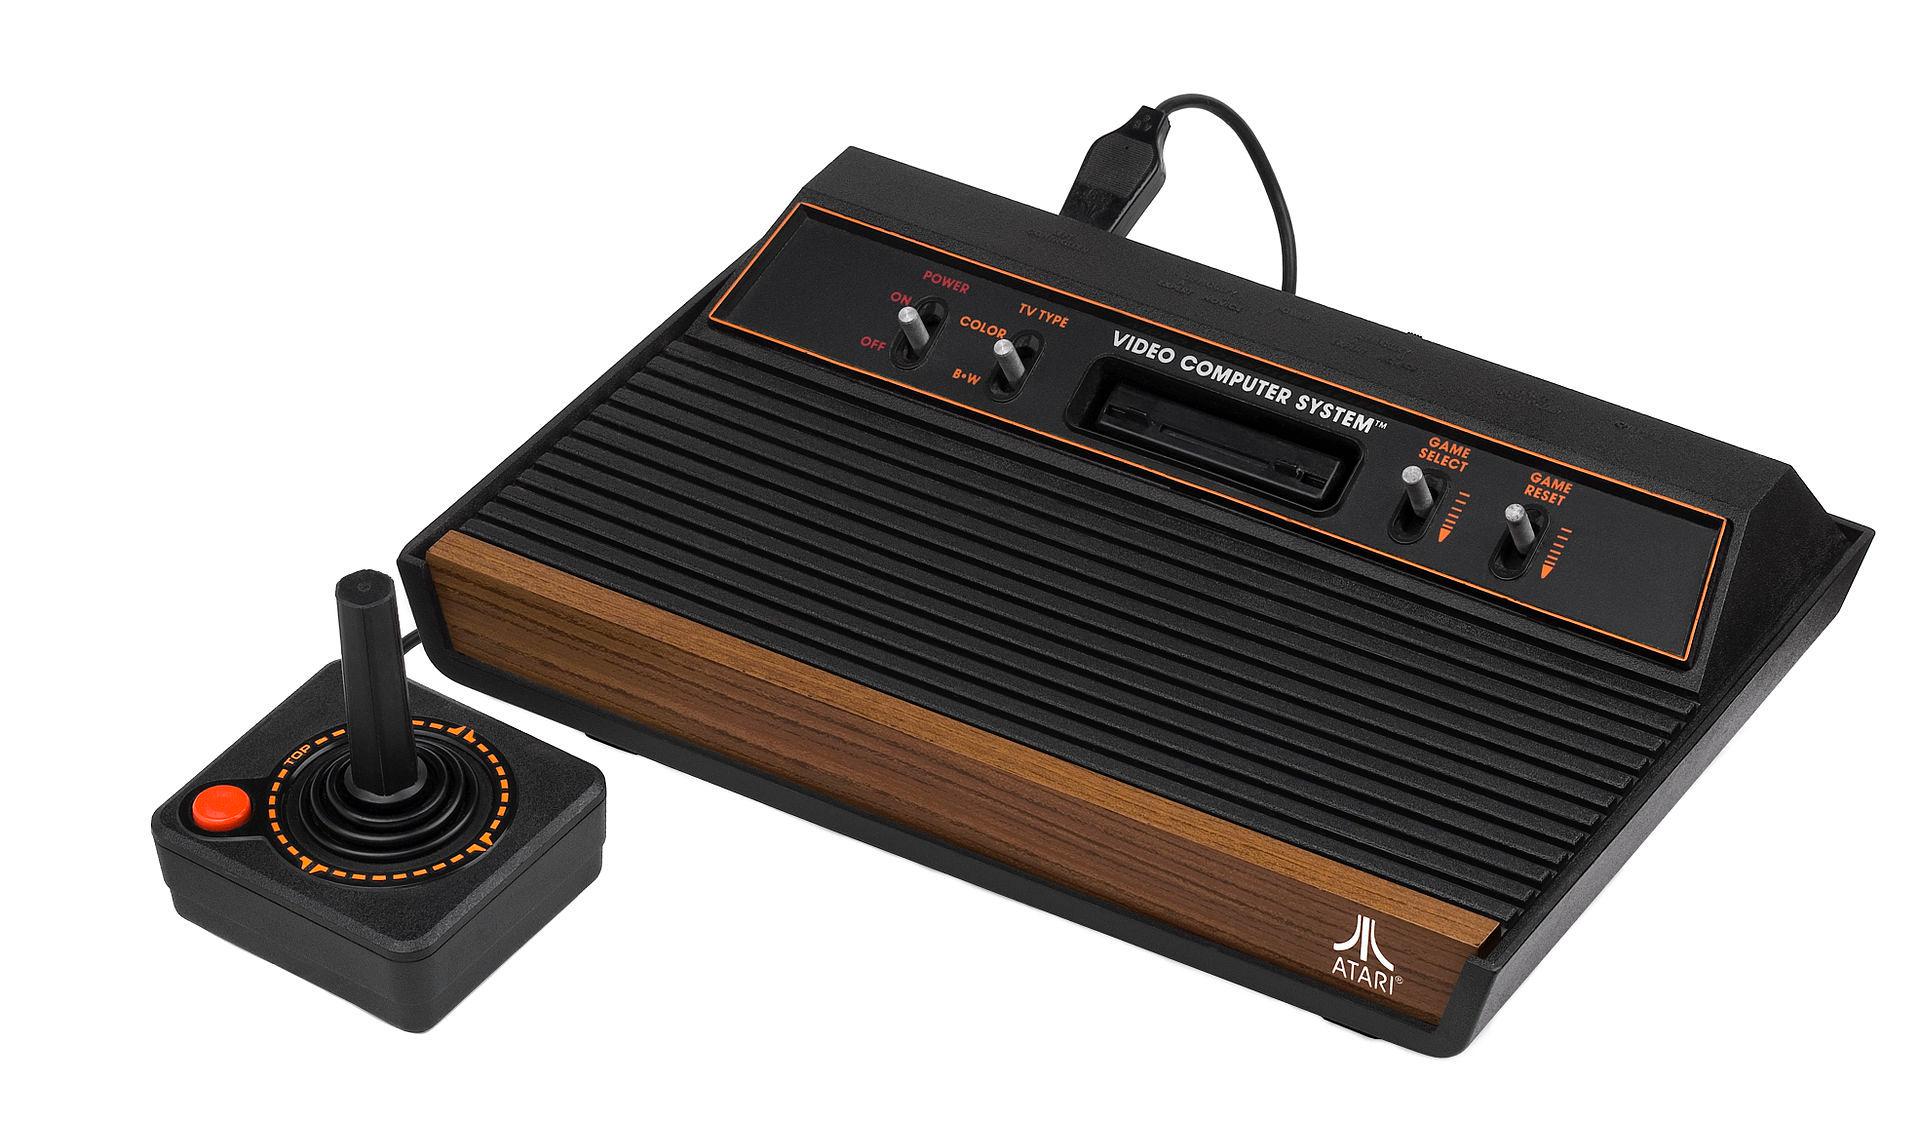 A complete Atari 2600 VCS console with joystick attached.